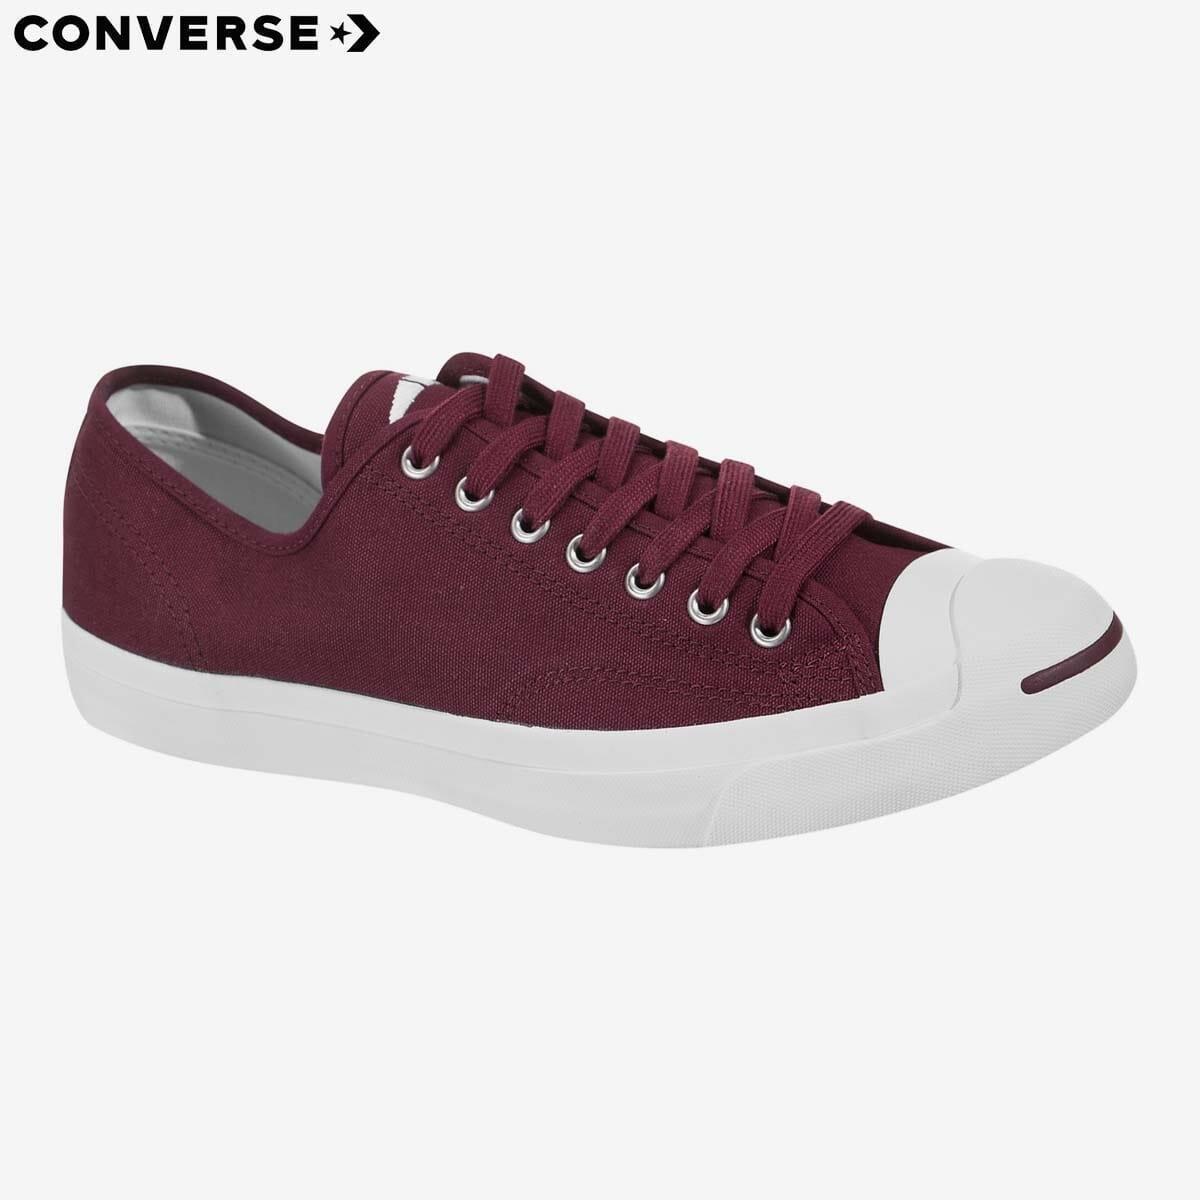 converse chuck taylor all star seasonal leather low top team red sneakers for unisex 161634c